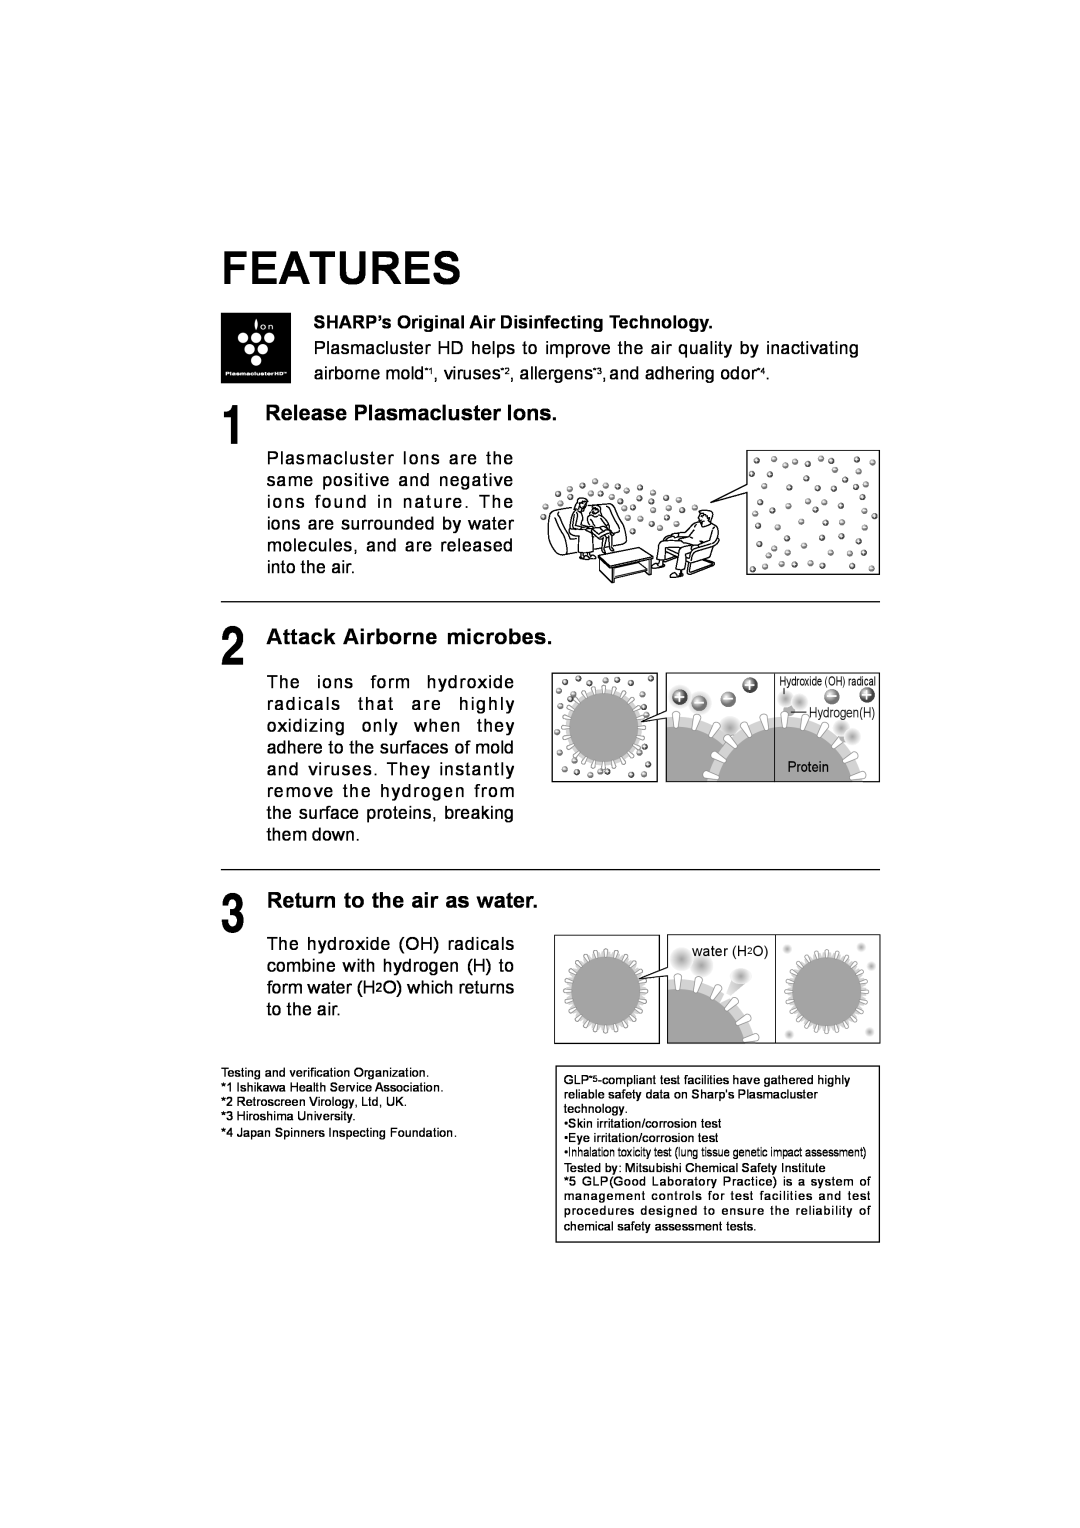 Sharp IG-A10E operation manual Features, Release Plasmacluster Ions, Attack Airborne microbes, Return to the air as water 